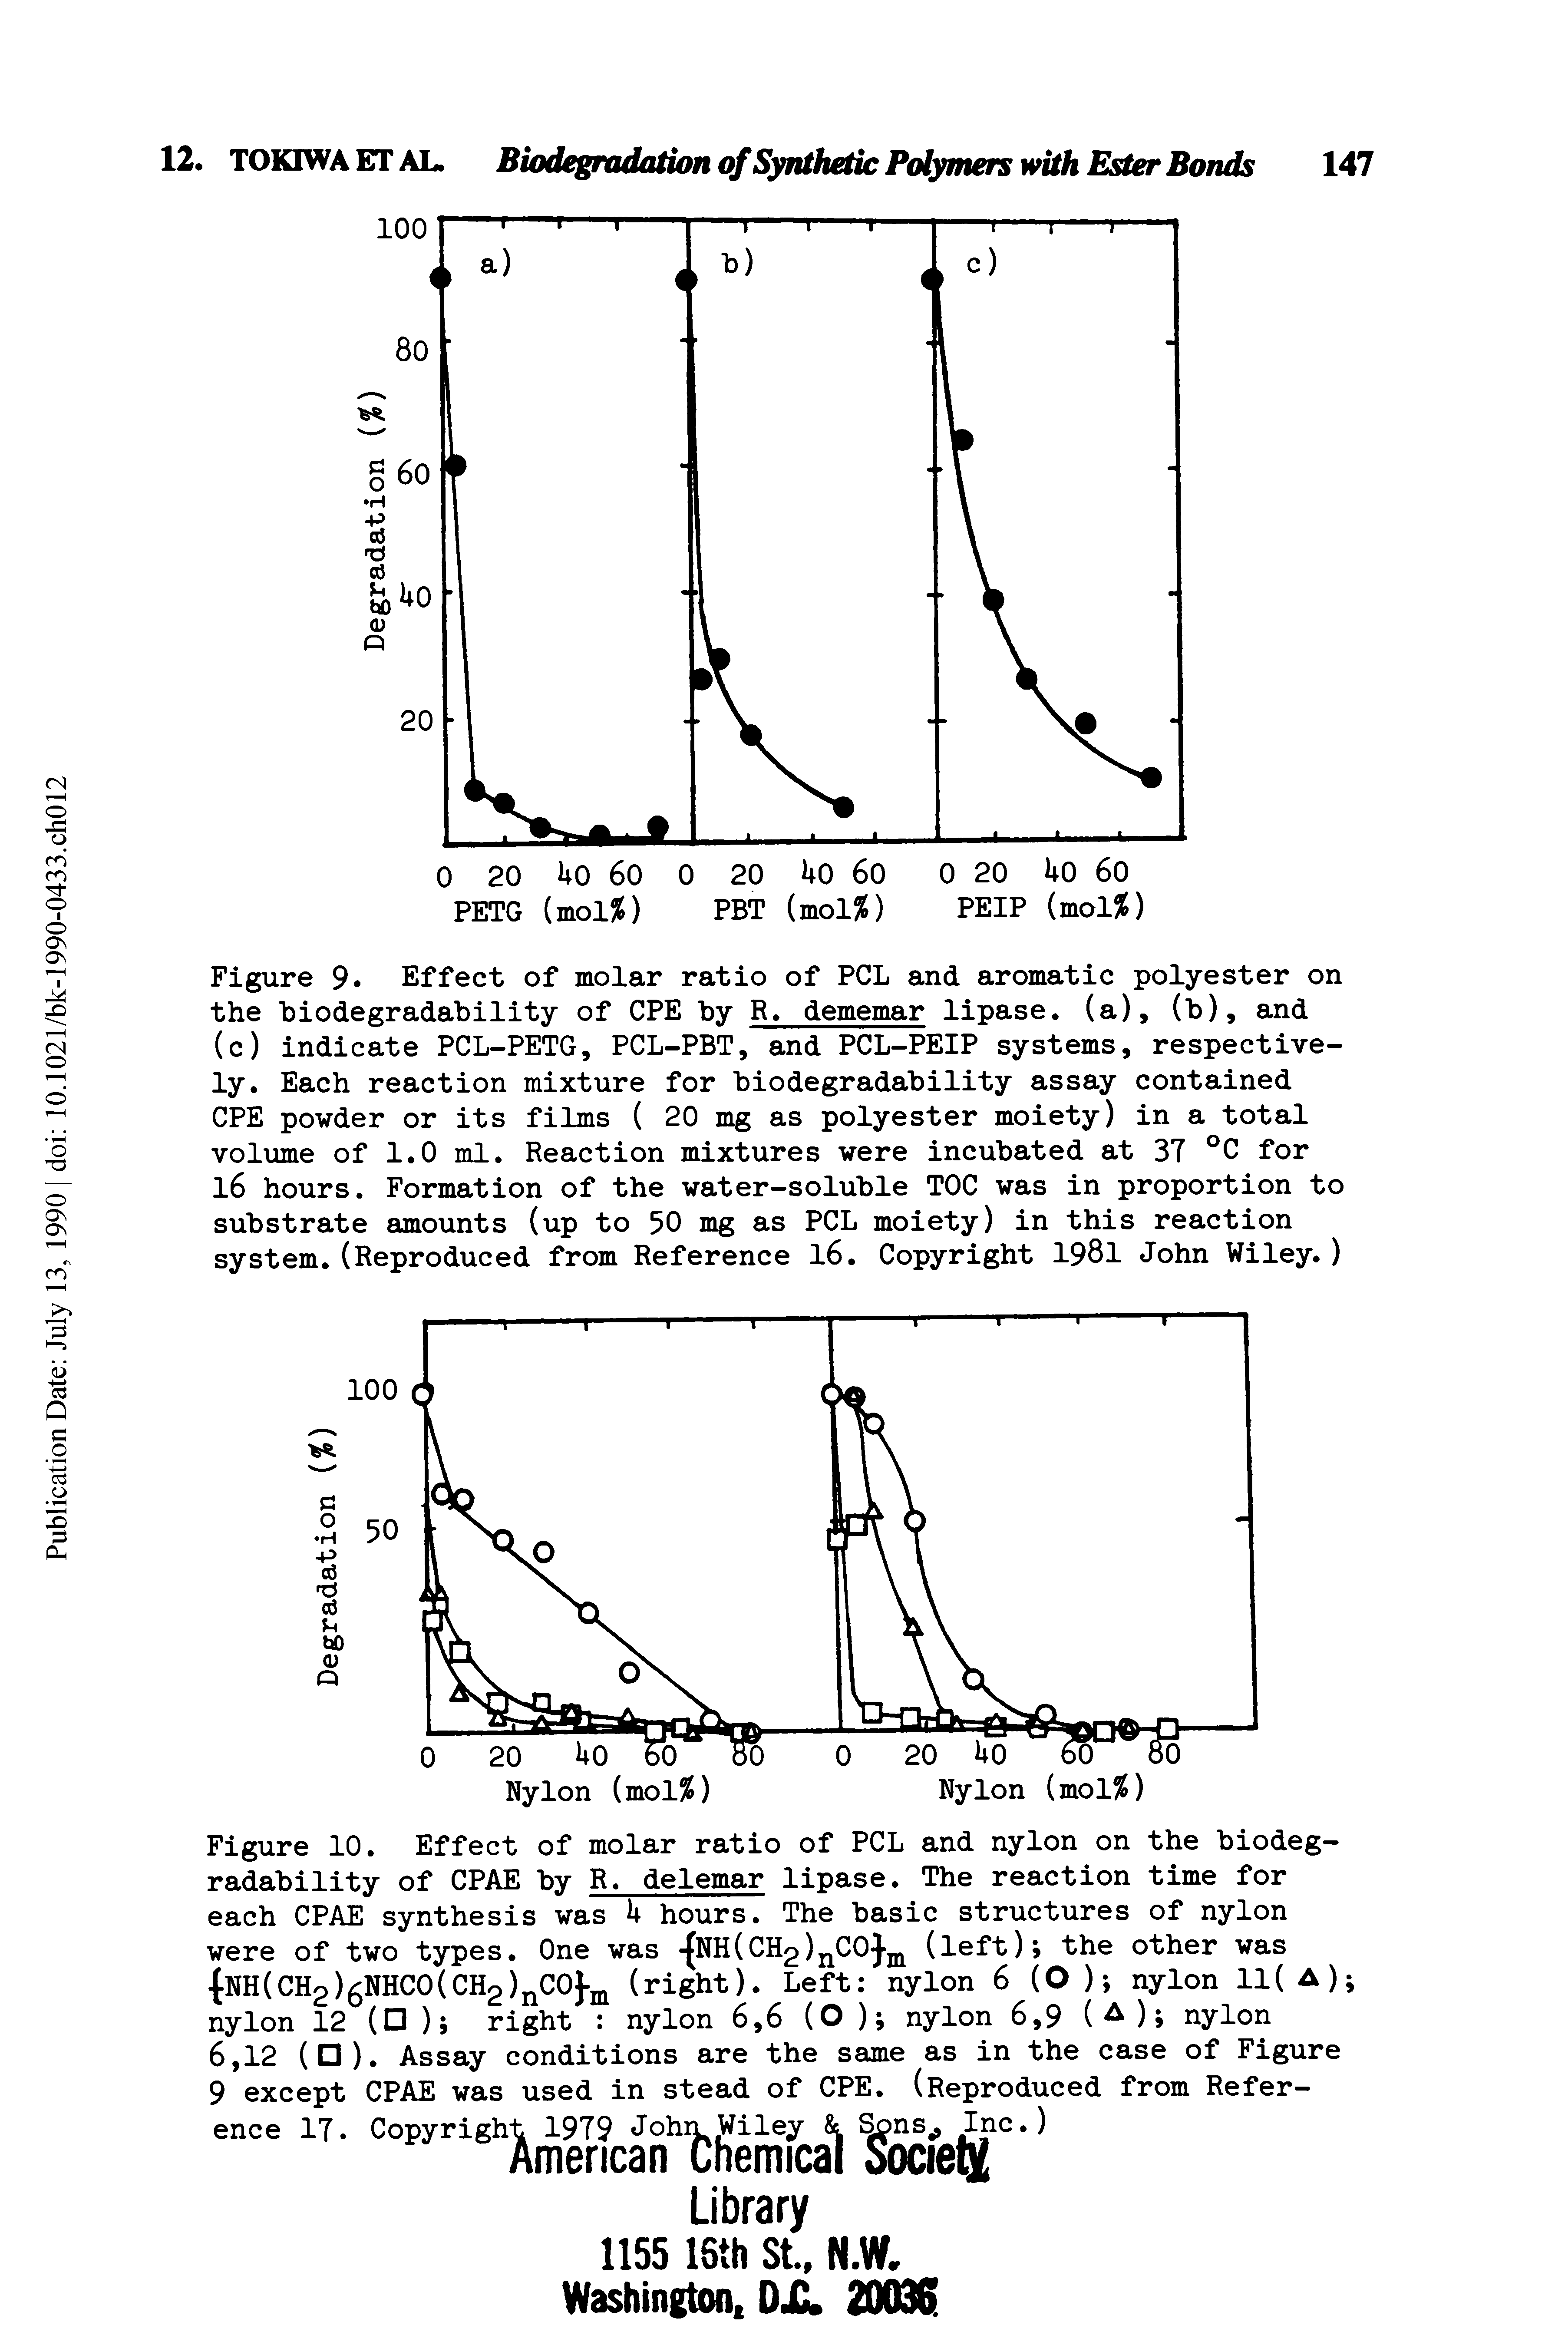 Figure 10. Effect of molar ratio of PCL and nylon on the biodegradability of CPAE by R. delemar lipase. The reaction time for each CPAE synthesis was k hours. The basic structures of nylon were of two types. One was - NH(0112) 0(left) the other was -jNH(CH2)5NHC0(CH2)nC0j-jn (right). Left nylon 6 (O) nylon 11(A) nylon 12 ( ) right nylon 6,6 (O ) nylon 6,9 (A) nylon 6,12 ( ). Assay conditions are the same as in the case of Figure 9 except CPAE was used in stead of CPE. (Reproduced from Reference IT. Copyright 1979 John Wiley ns Inc.)...